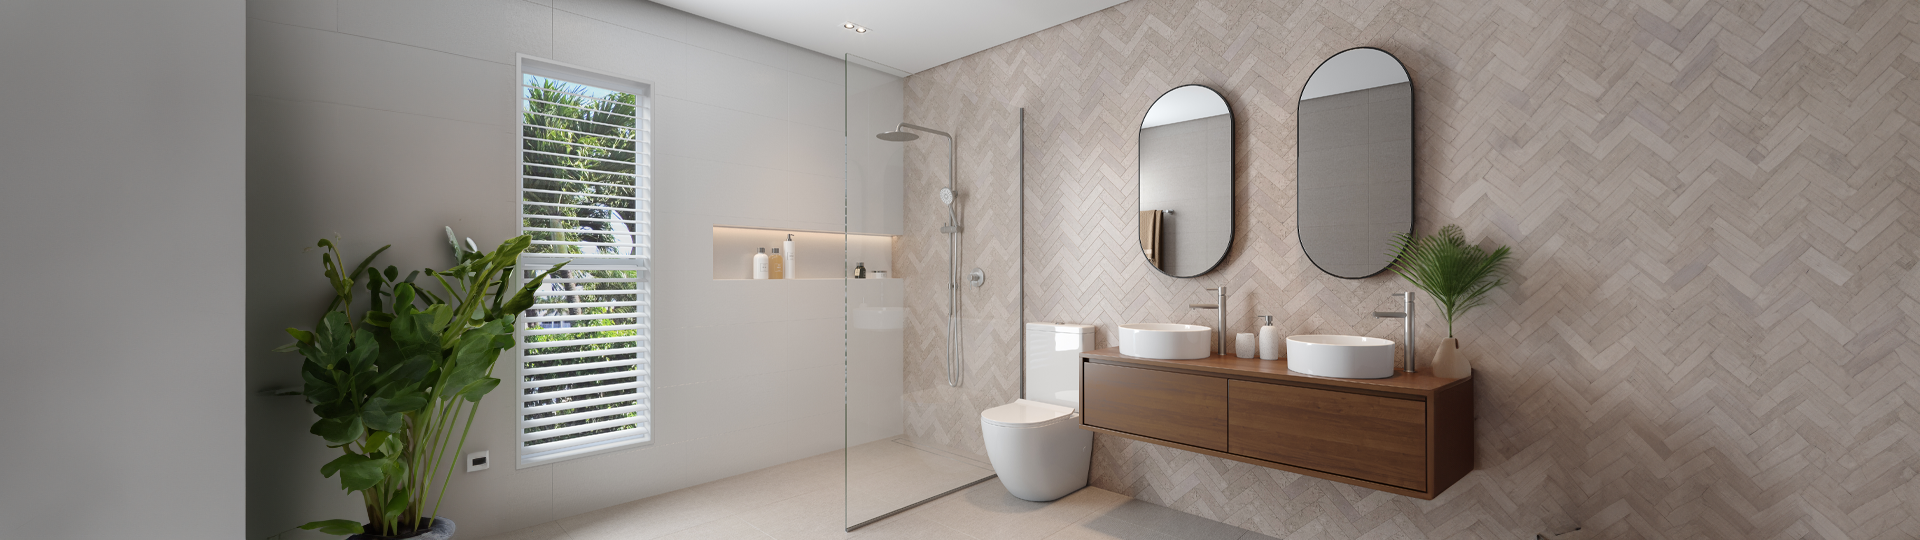 Neutral coloured bathroom with herringbone tile feature wall, wood vanity, white basins and clear shower screen with chrome tapware and shower